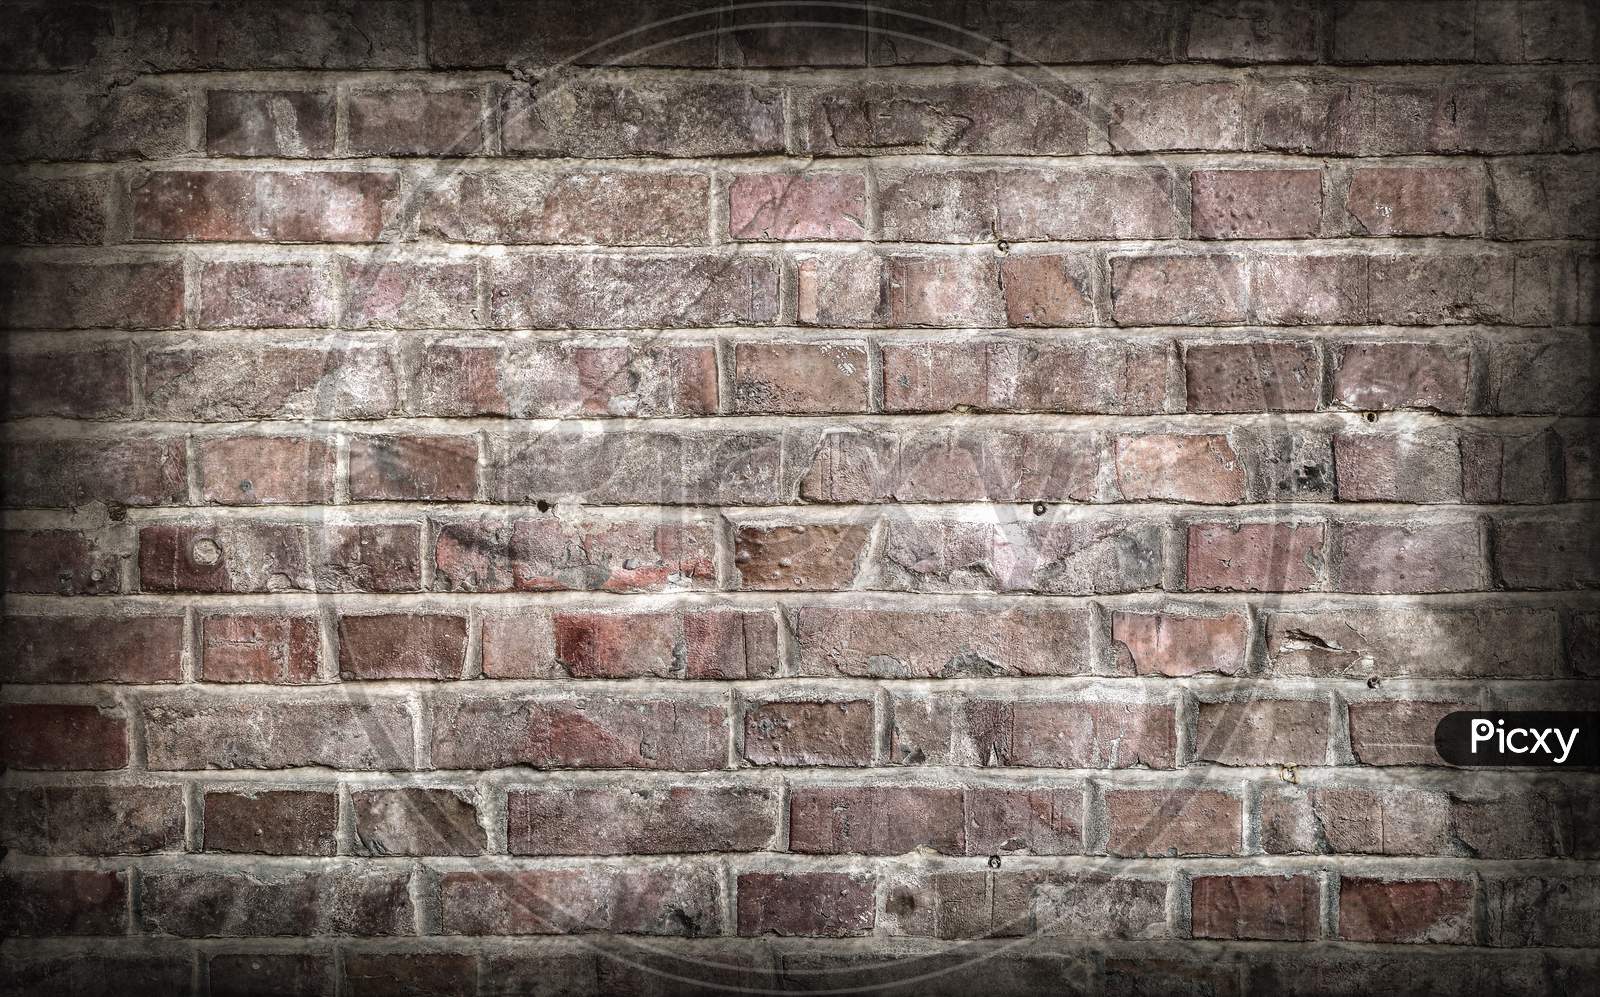 Aged And Weathered Old Brick Wall Texture In A Retro Vintage Design